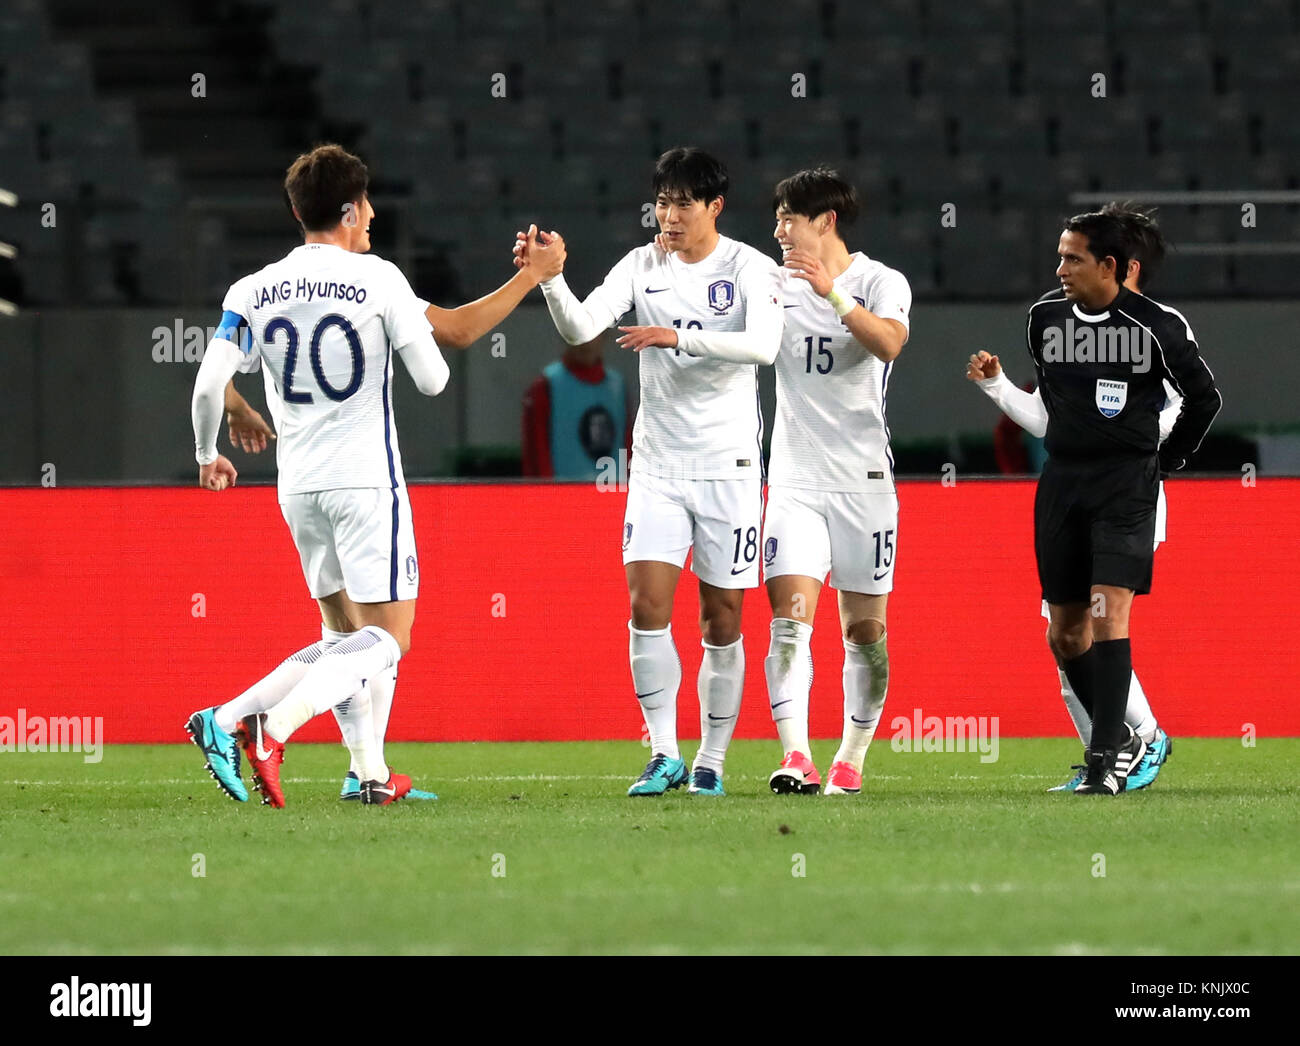 Tokyo, Japan. 12th Dec, 2017. South Korean players celebrate each opther for North Korea's own goal during the EAFF E-1 championship final at the Ajinomoto stadium in Tokyo on Tuesday, December 12, 2017. South Korea defeated North Korea 1-0. Credit: Yoshio Tsunoda/AFLO/Alamy Live News Stock Photo